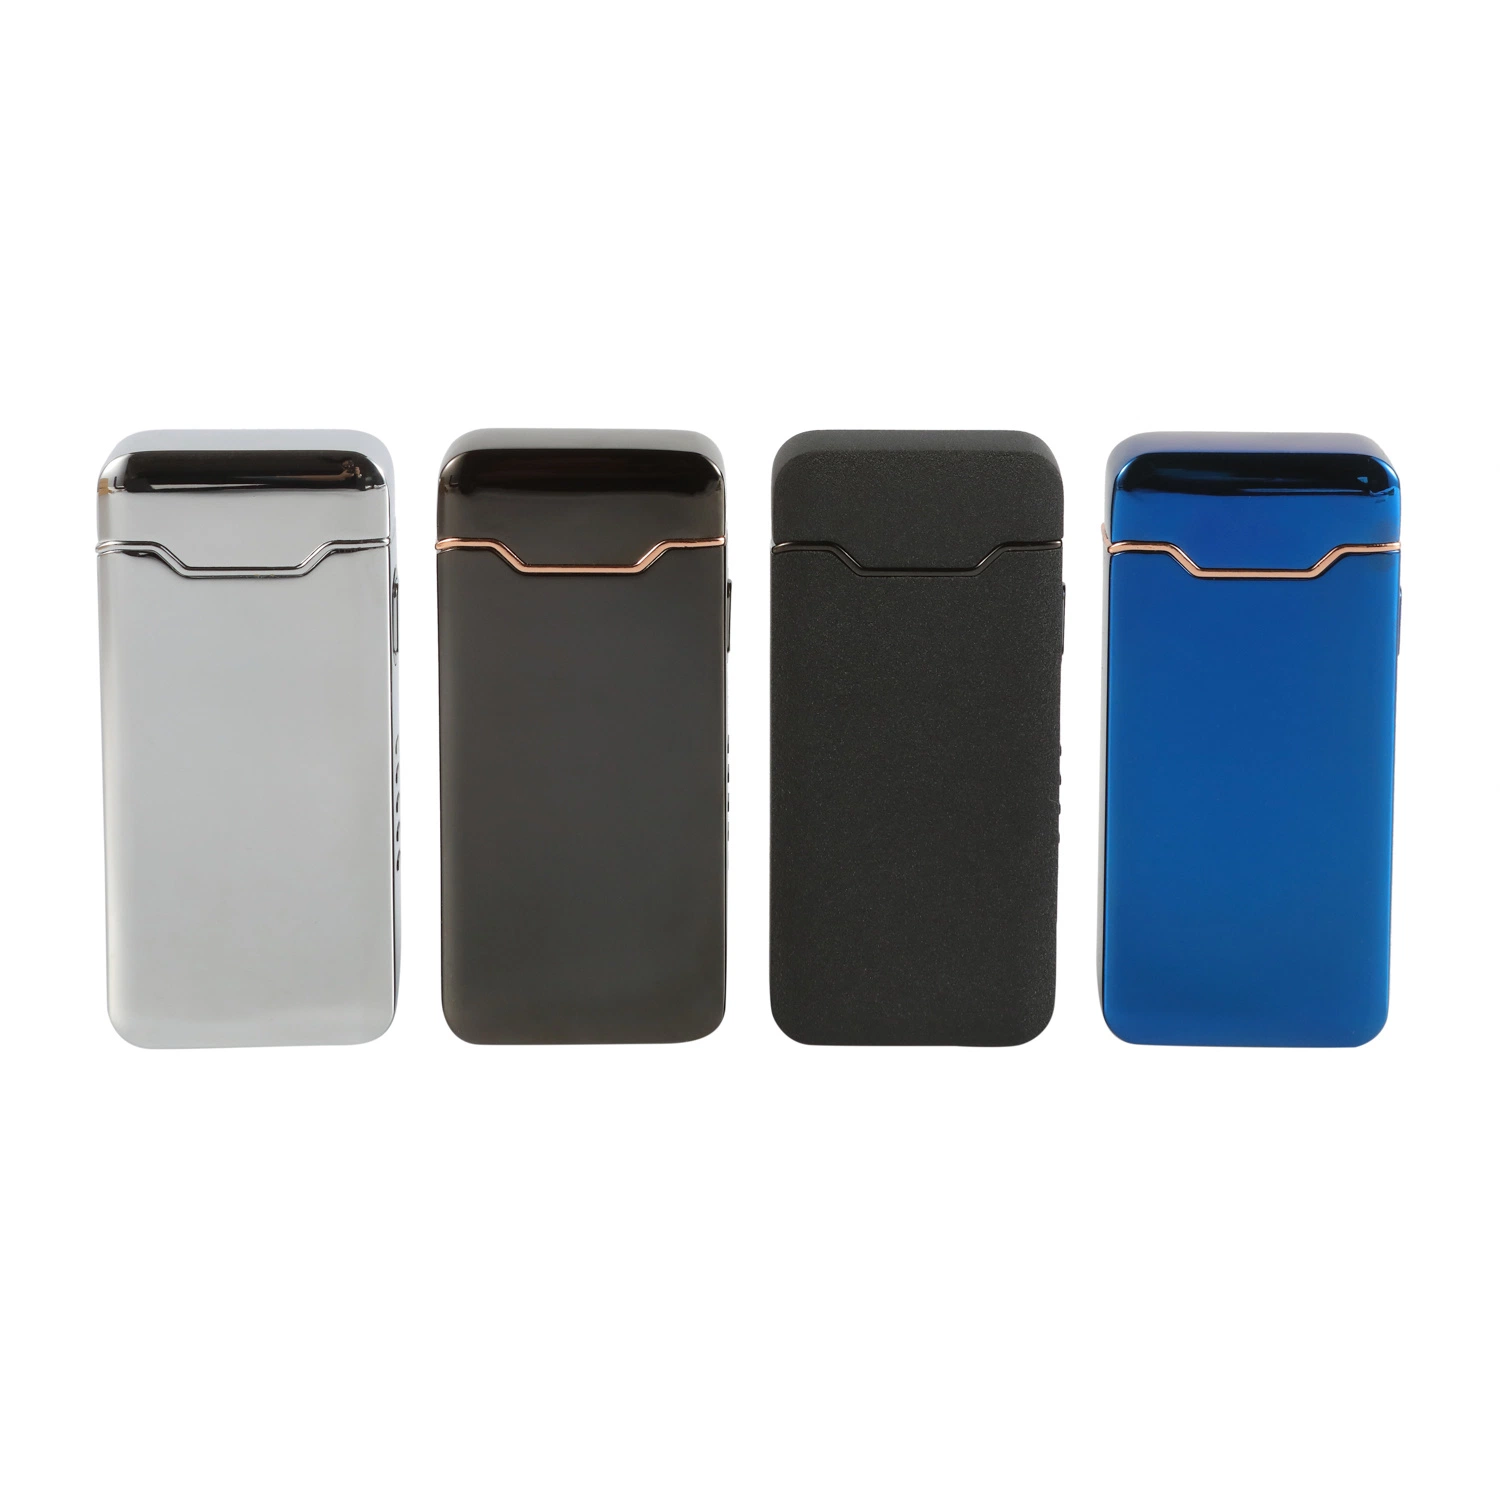 Latest Custom Strong Flame Windproof Electric Arc USB Unusual Lighter Electronic Lighter Chargeable for Men Gifts